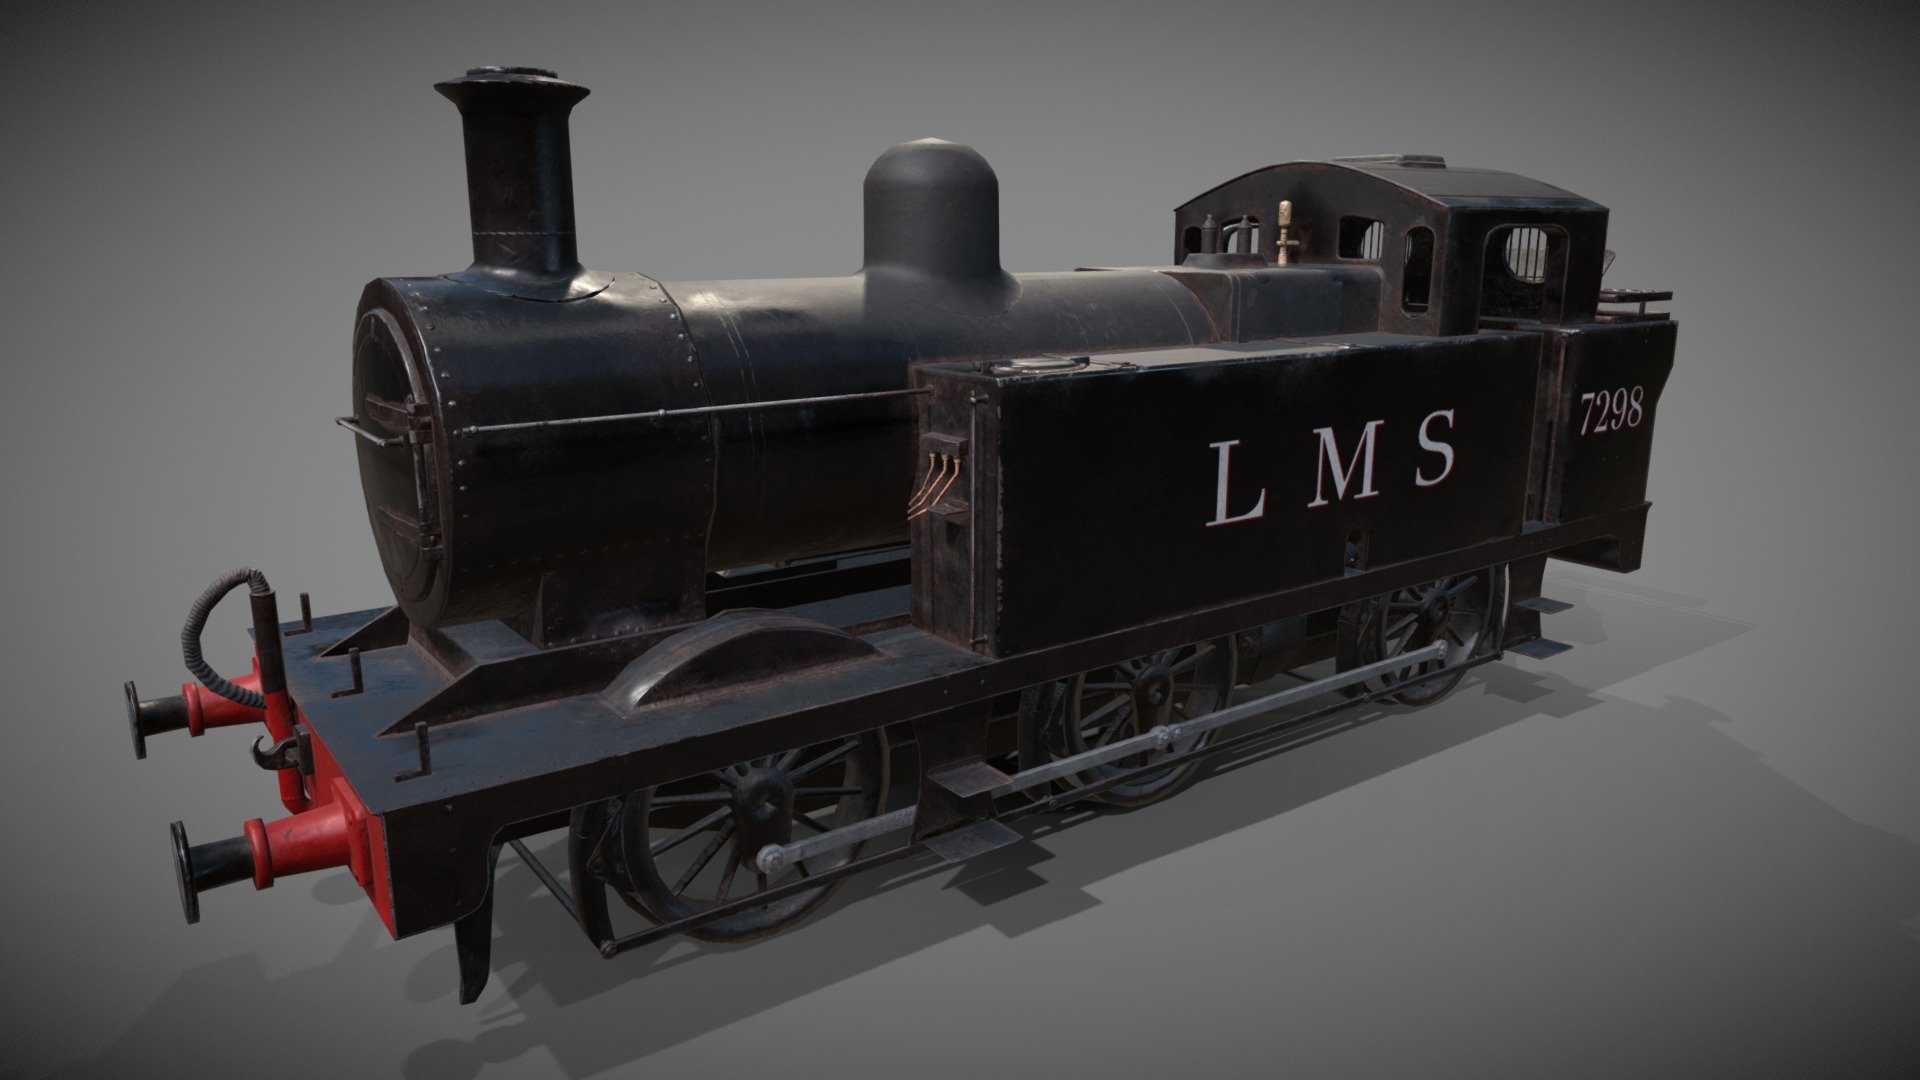 Low poly Jinty Steam Locomotive

13178 polys 4096x4096 PBR textures.

Also included .psd for ease of editing colours and text 3d model